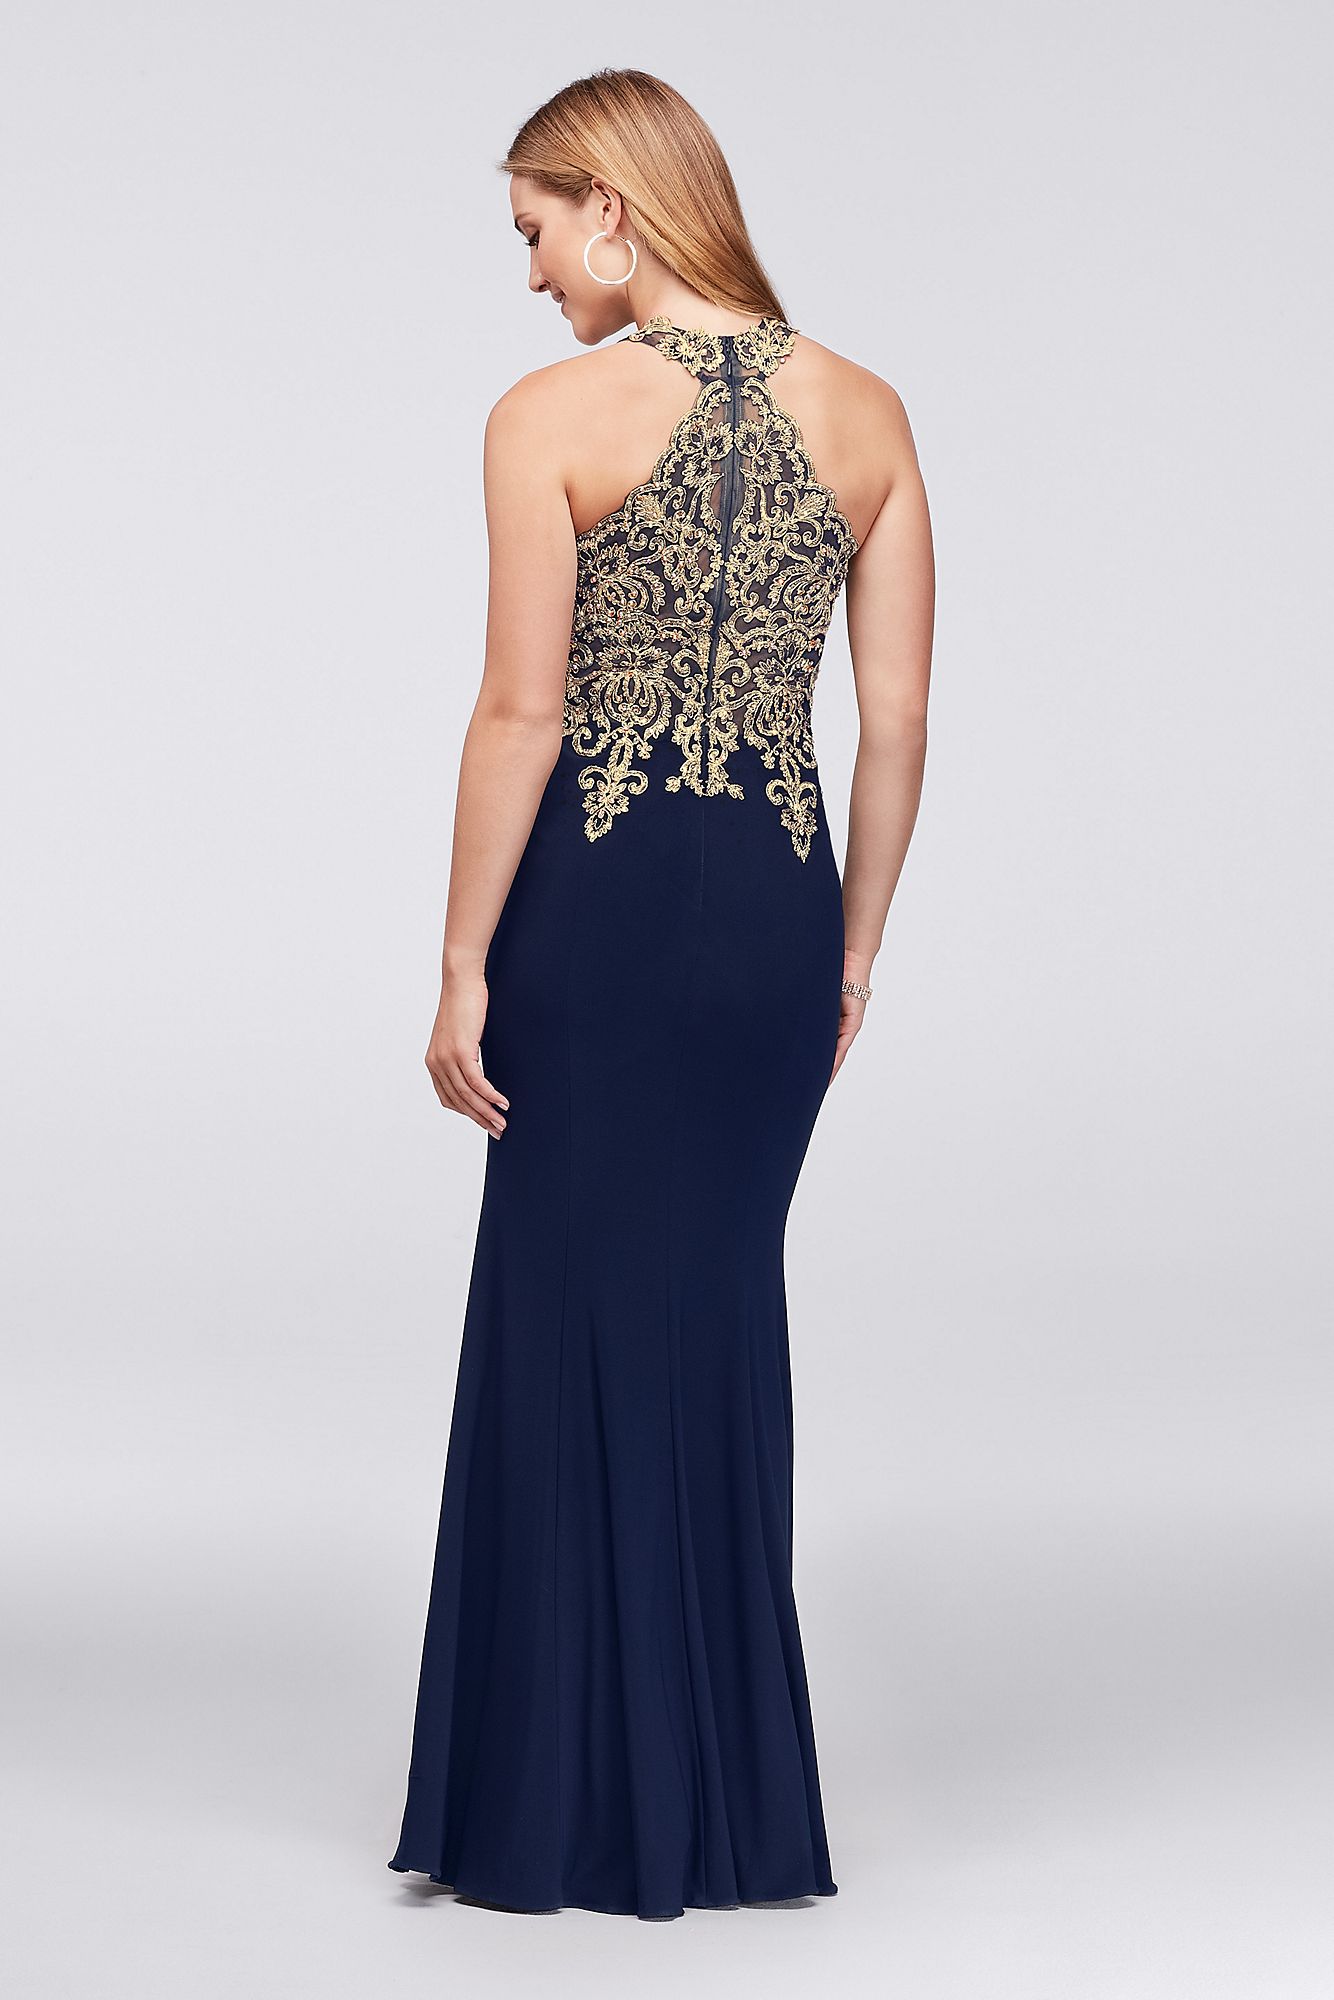 Metallic Lace and Jersey Round Neck Halter Gown XS9331